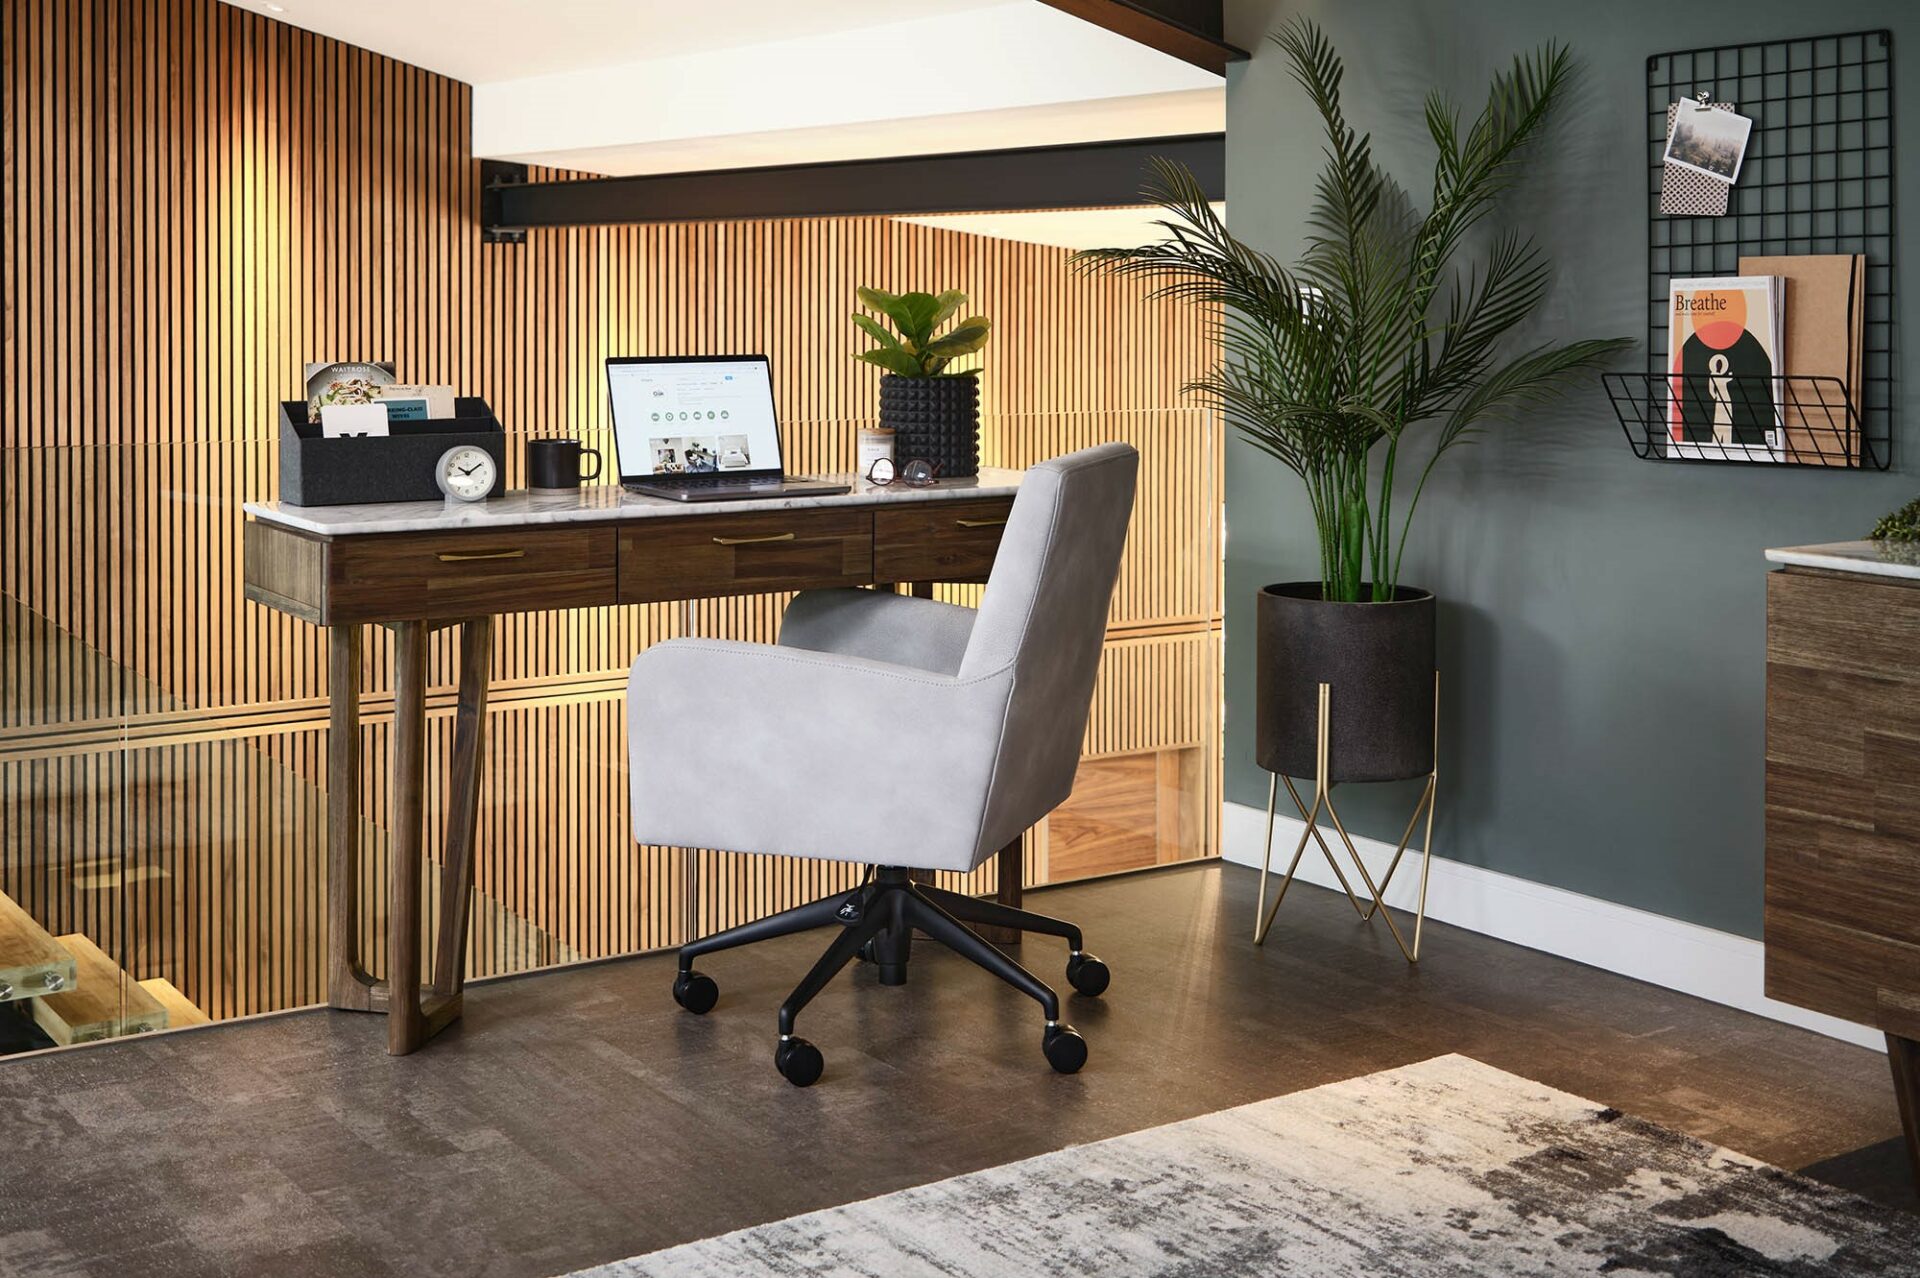 A desk and office chair-office furniture-wooden desk with drawers-upholstered office chair